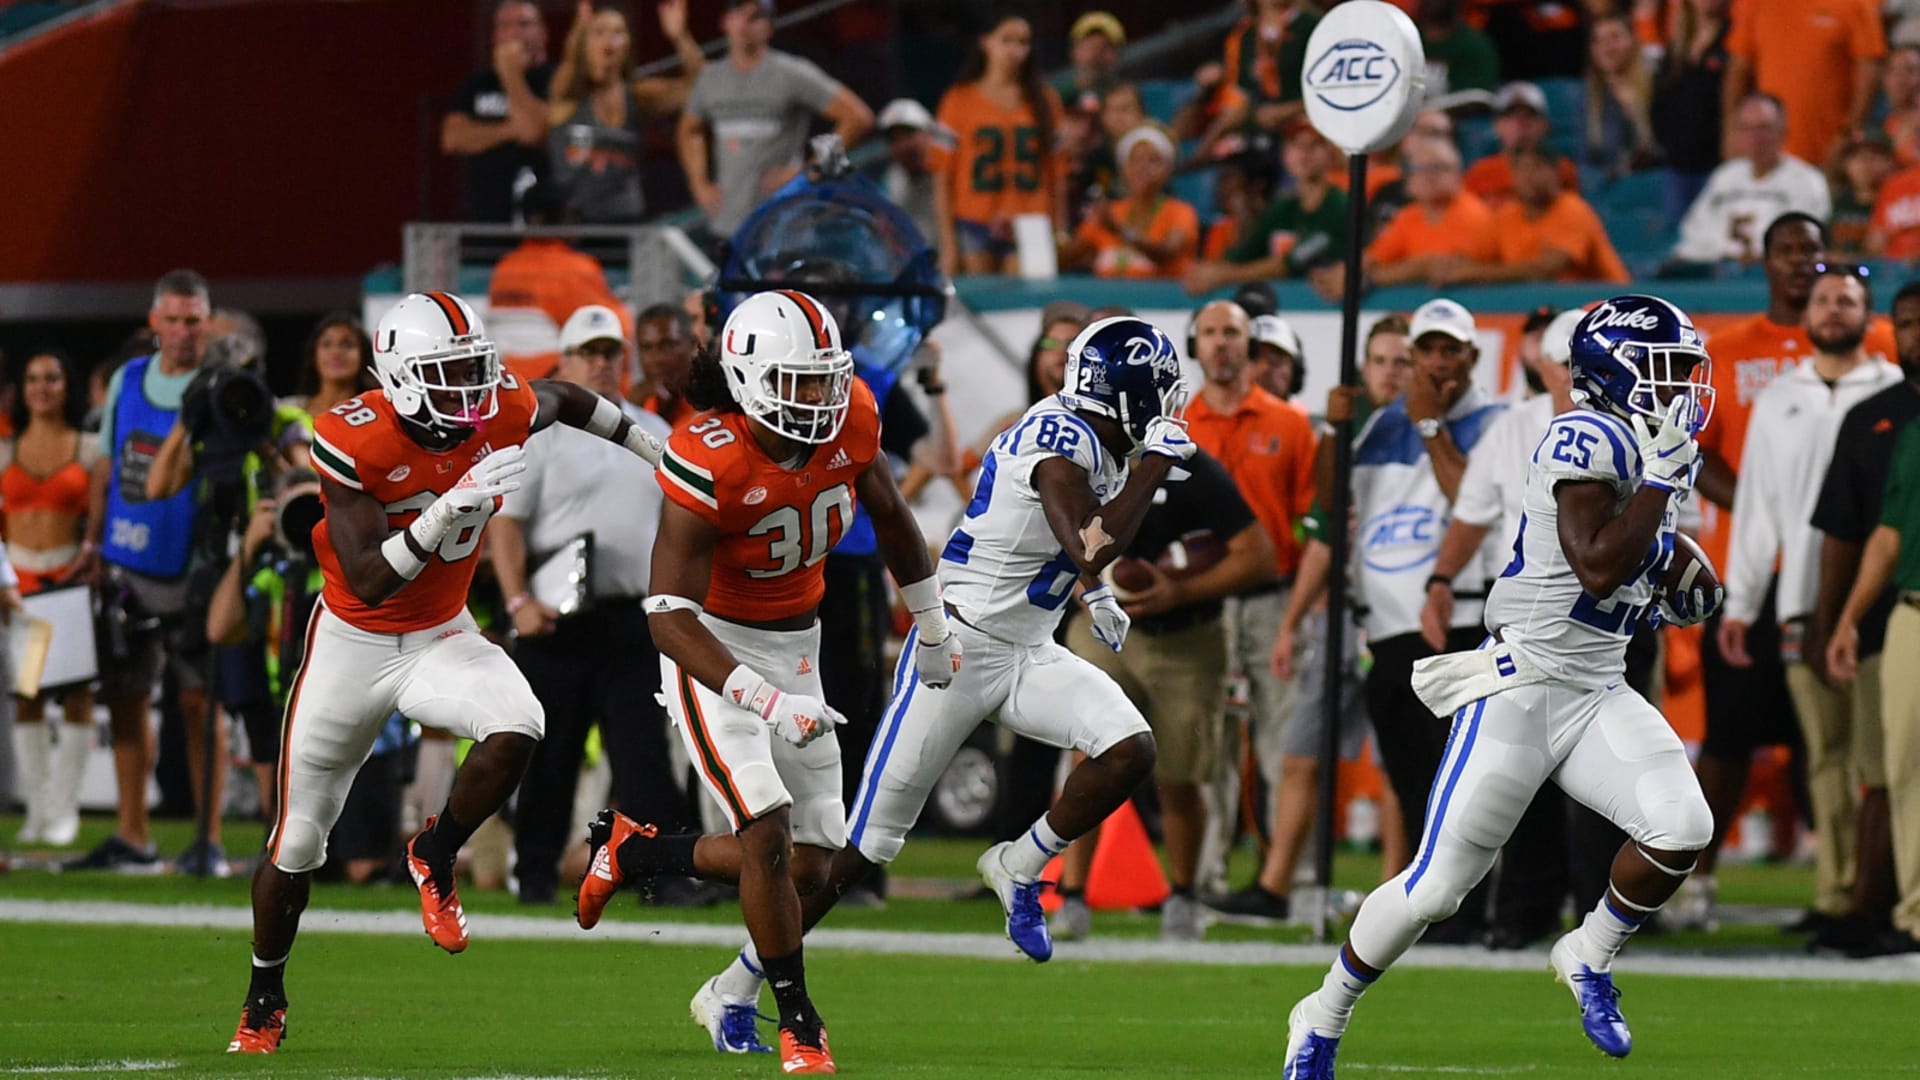 Duke and Miami to close out regular season with afternoon kickoff